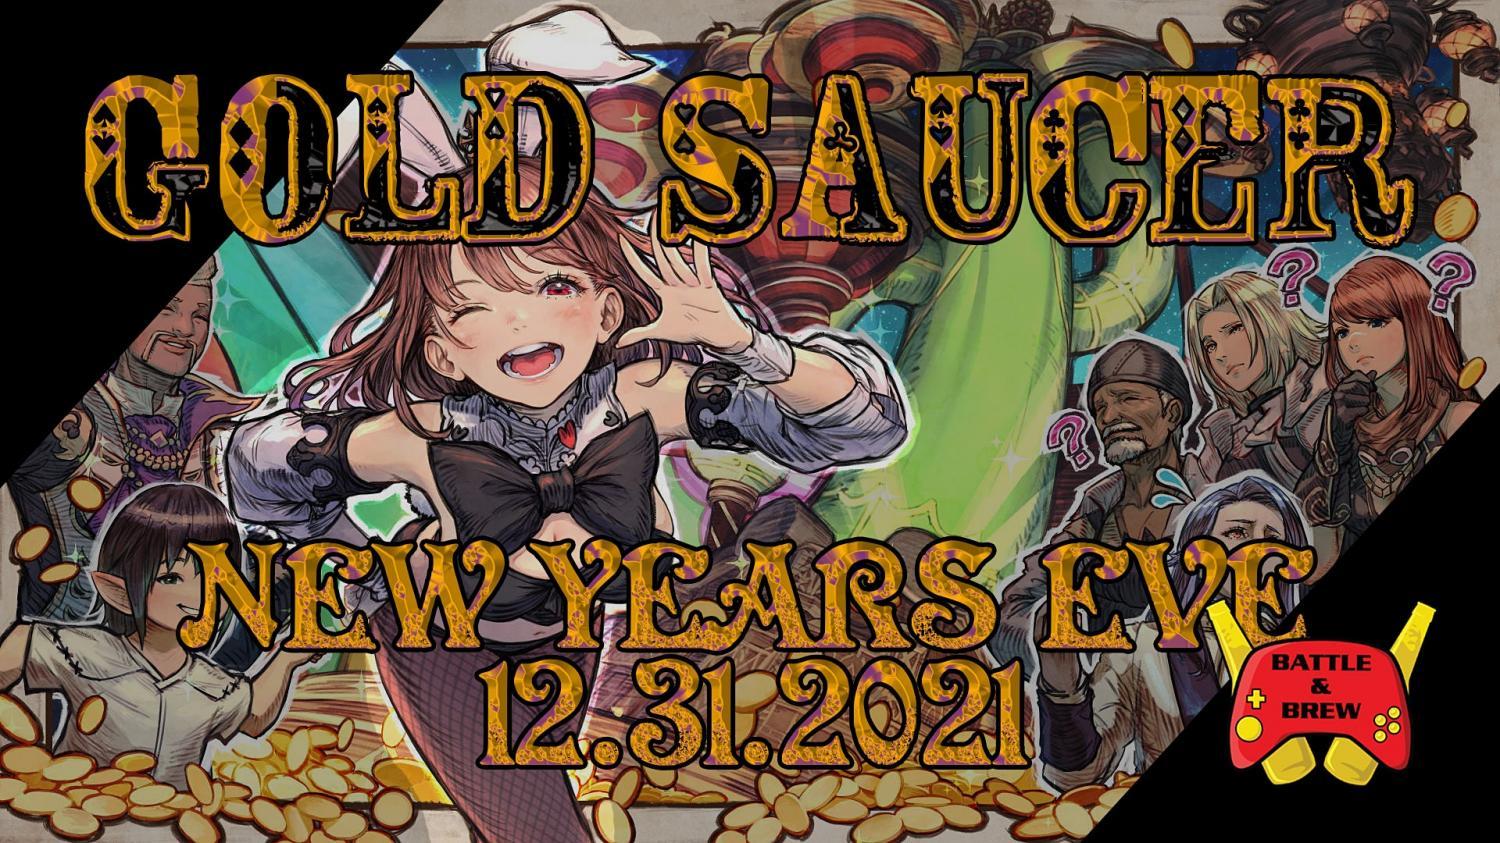 Gold Saucer New Years Eve Party - Battle & Brew